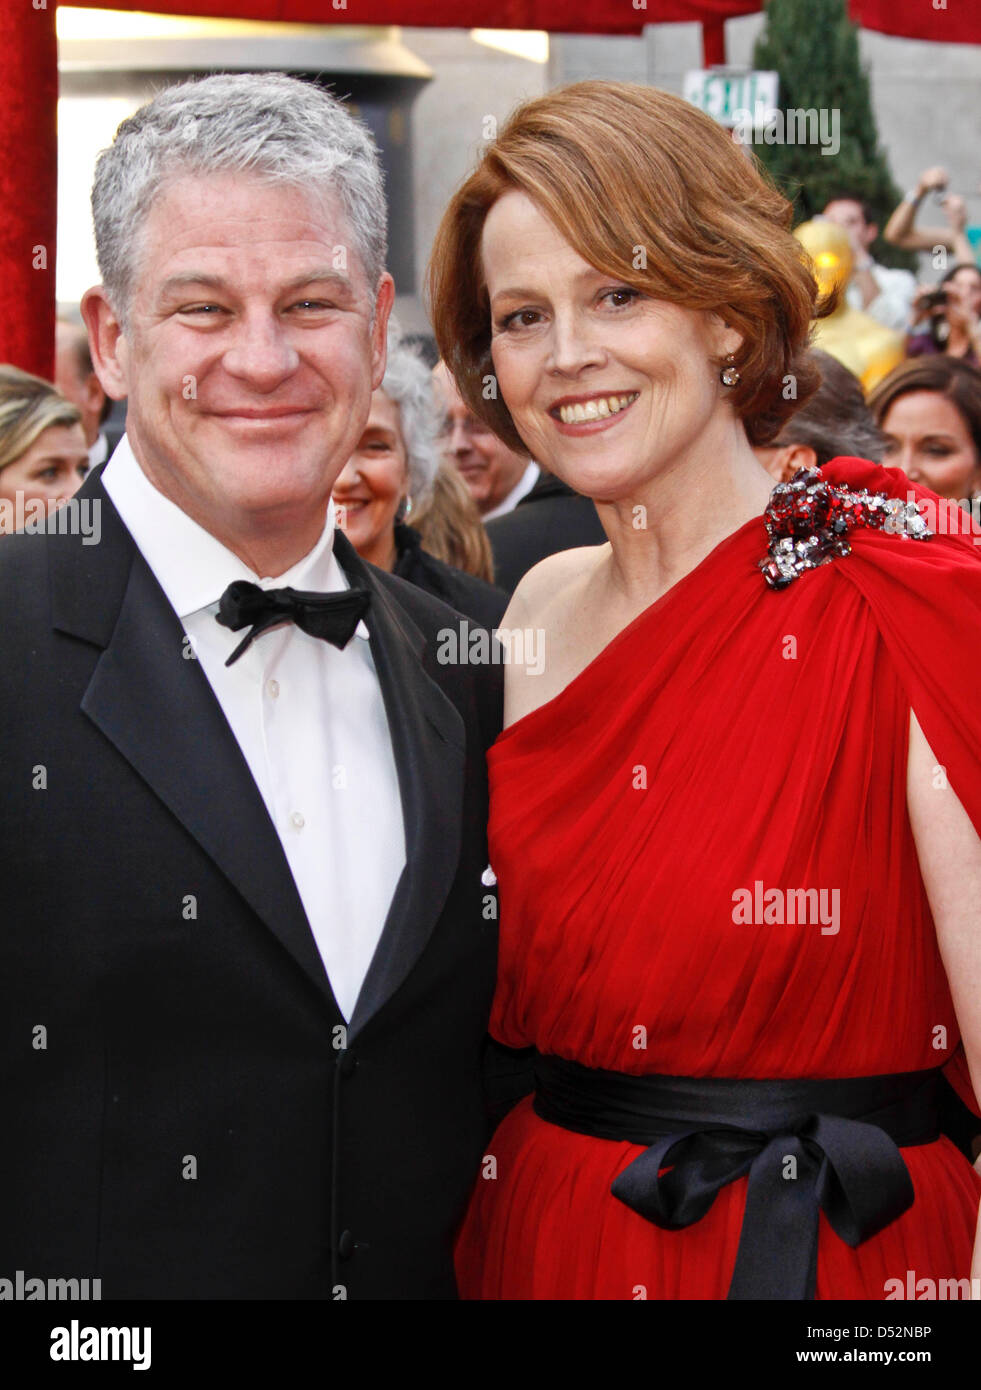 US actress Sigourney Weaver and her husband Jim Simpson arrive on the red carpet during the 82nd Annual Academy Awards at the Kodak Theatre in Hollywood, USA, 07 March 2010. The Oscars are awarded for outstanding individual or collective efforts in up to 25 categories in filmmaking. Photo: HUBERT BOESL Stock Photo